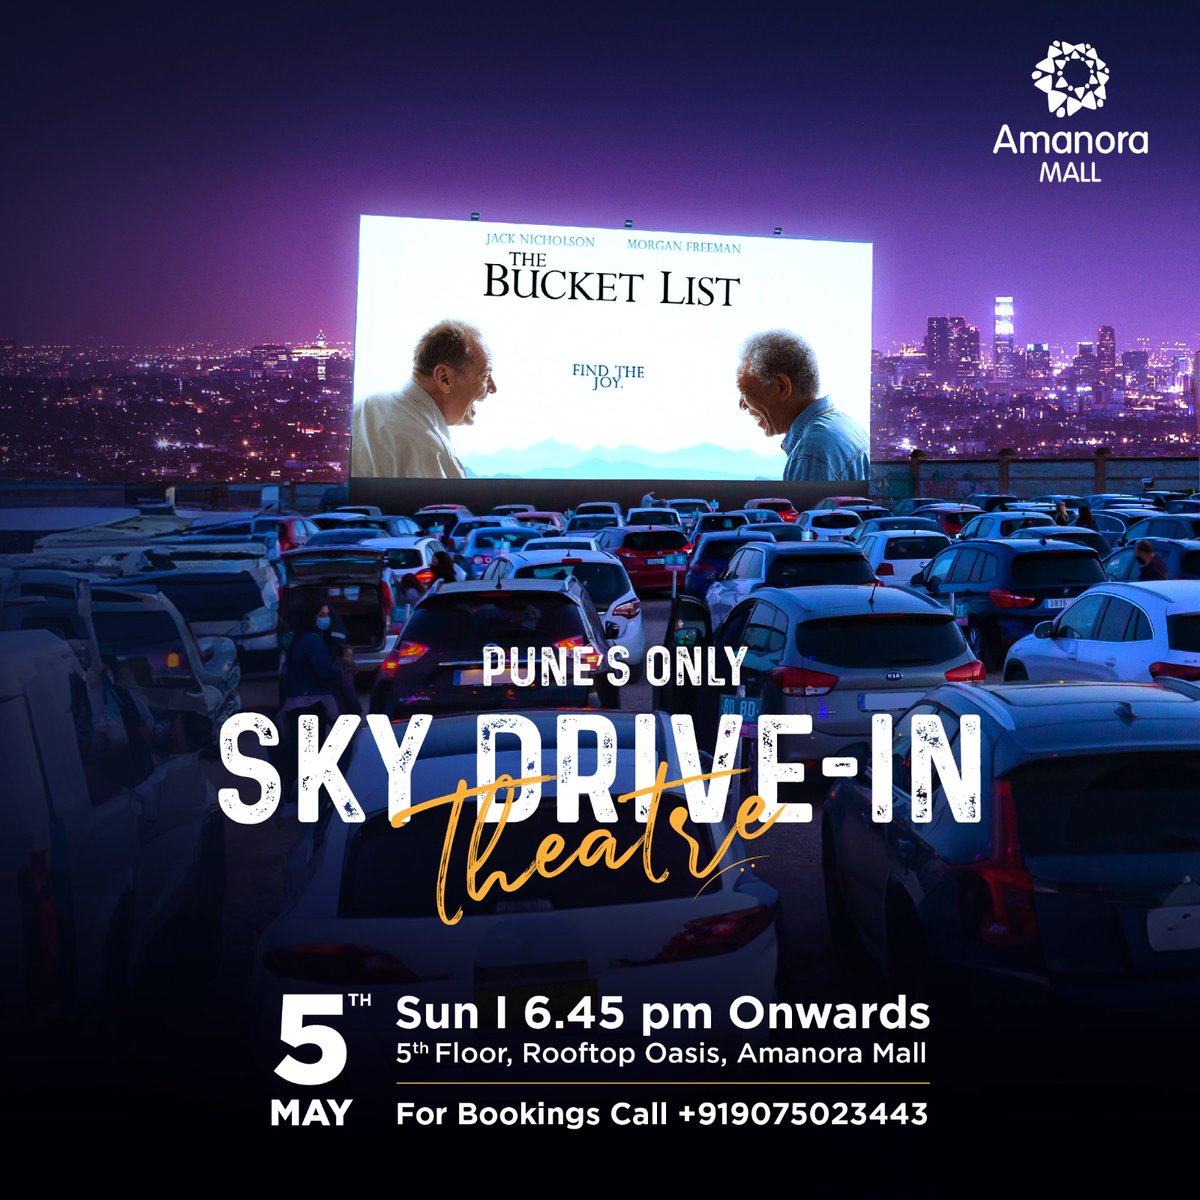 Rev up your engines! 🚗 Join us under the stars for an unforgettable evening at Amanora Sky Drive-in Theater on May 5th, 2024, for  'The Bucket List.' 🌟 May 5th, 6:45 pm onwards.
 Reserve your spot: 📞 +919075023443. #AmanoraMall #Pune #skydrivein #driveintheater #Movies